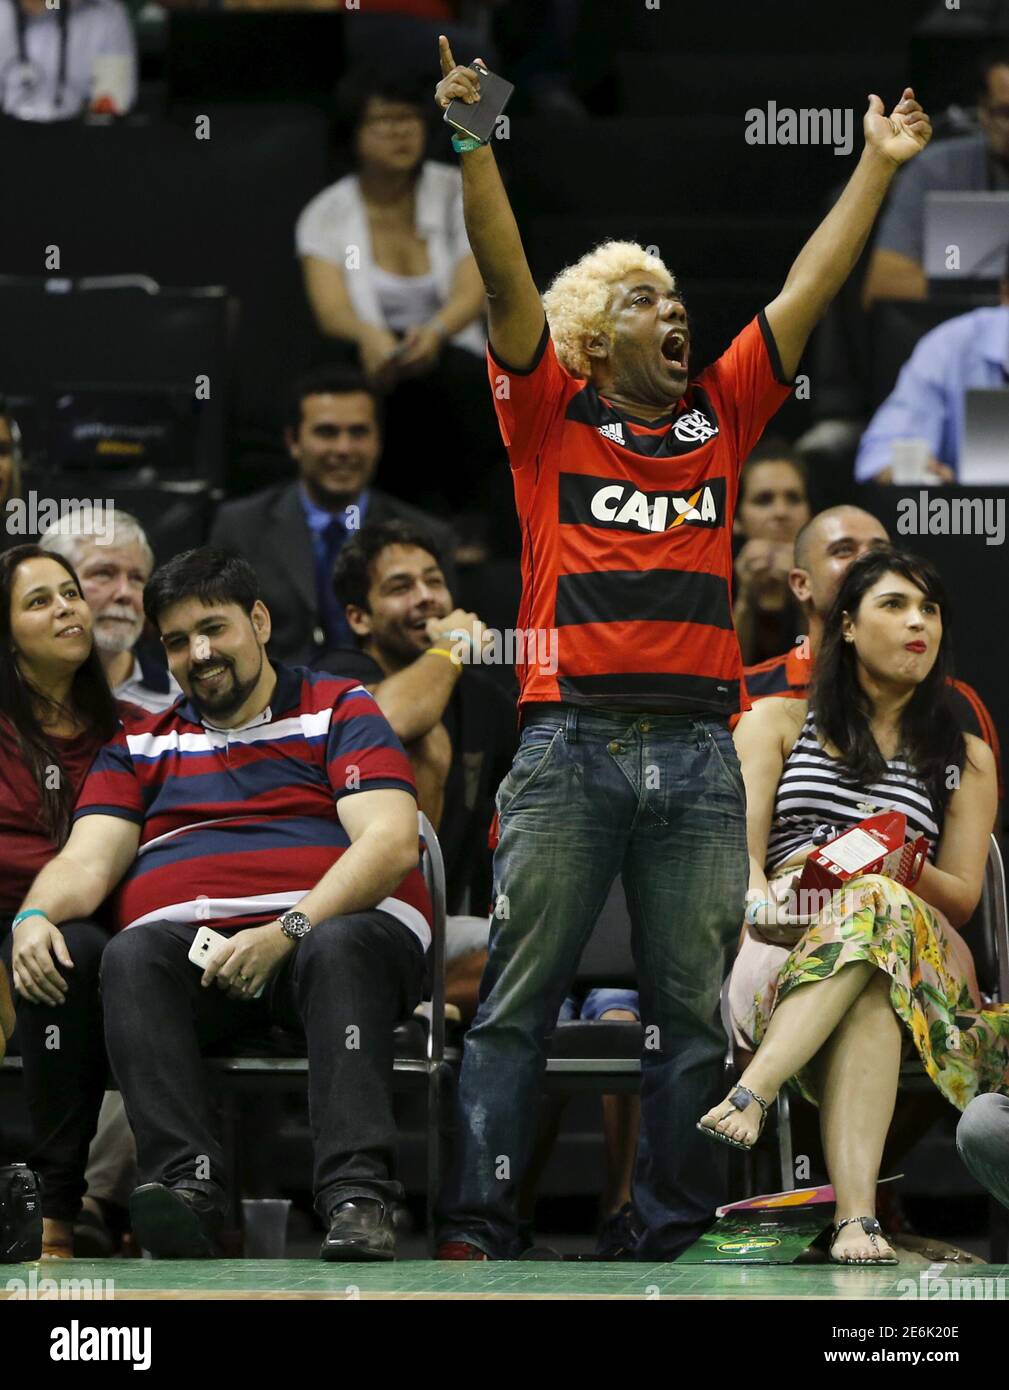 A fan of Brazil's Flamengo gestures during their NBA Global Games  basketball match against Orlando Magic in Rio de Janeiro, Brazil, October  17, 2015. REUTERS/Sergio Moraes Stock Photo - Alamy